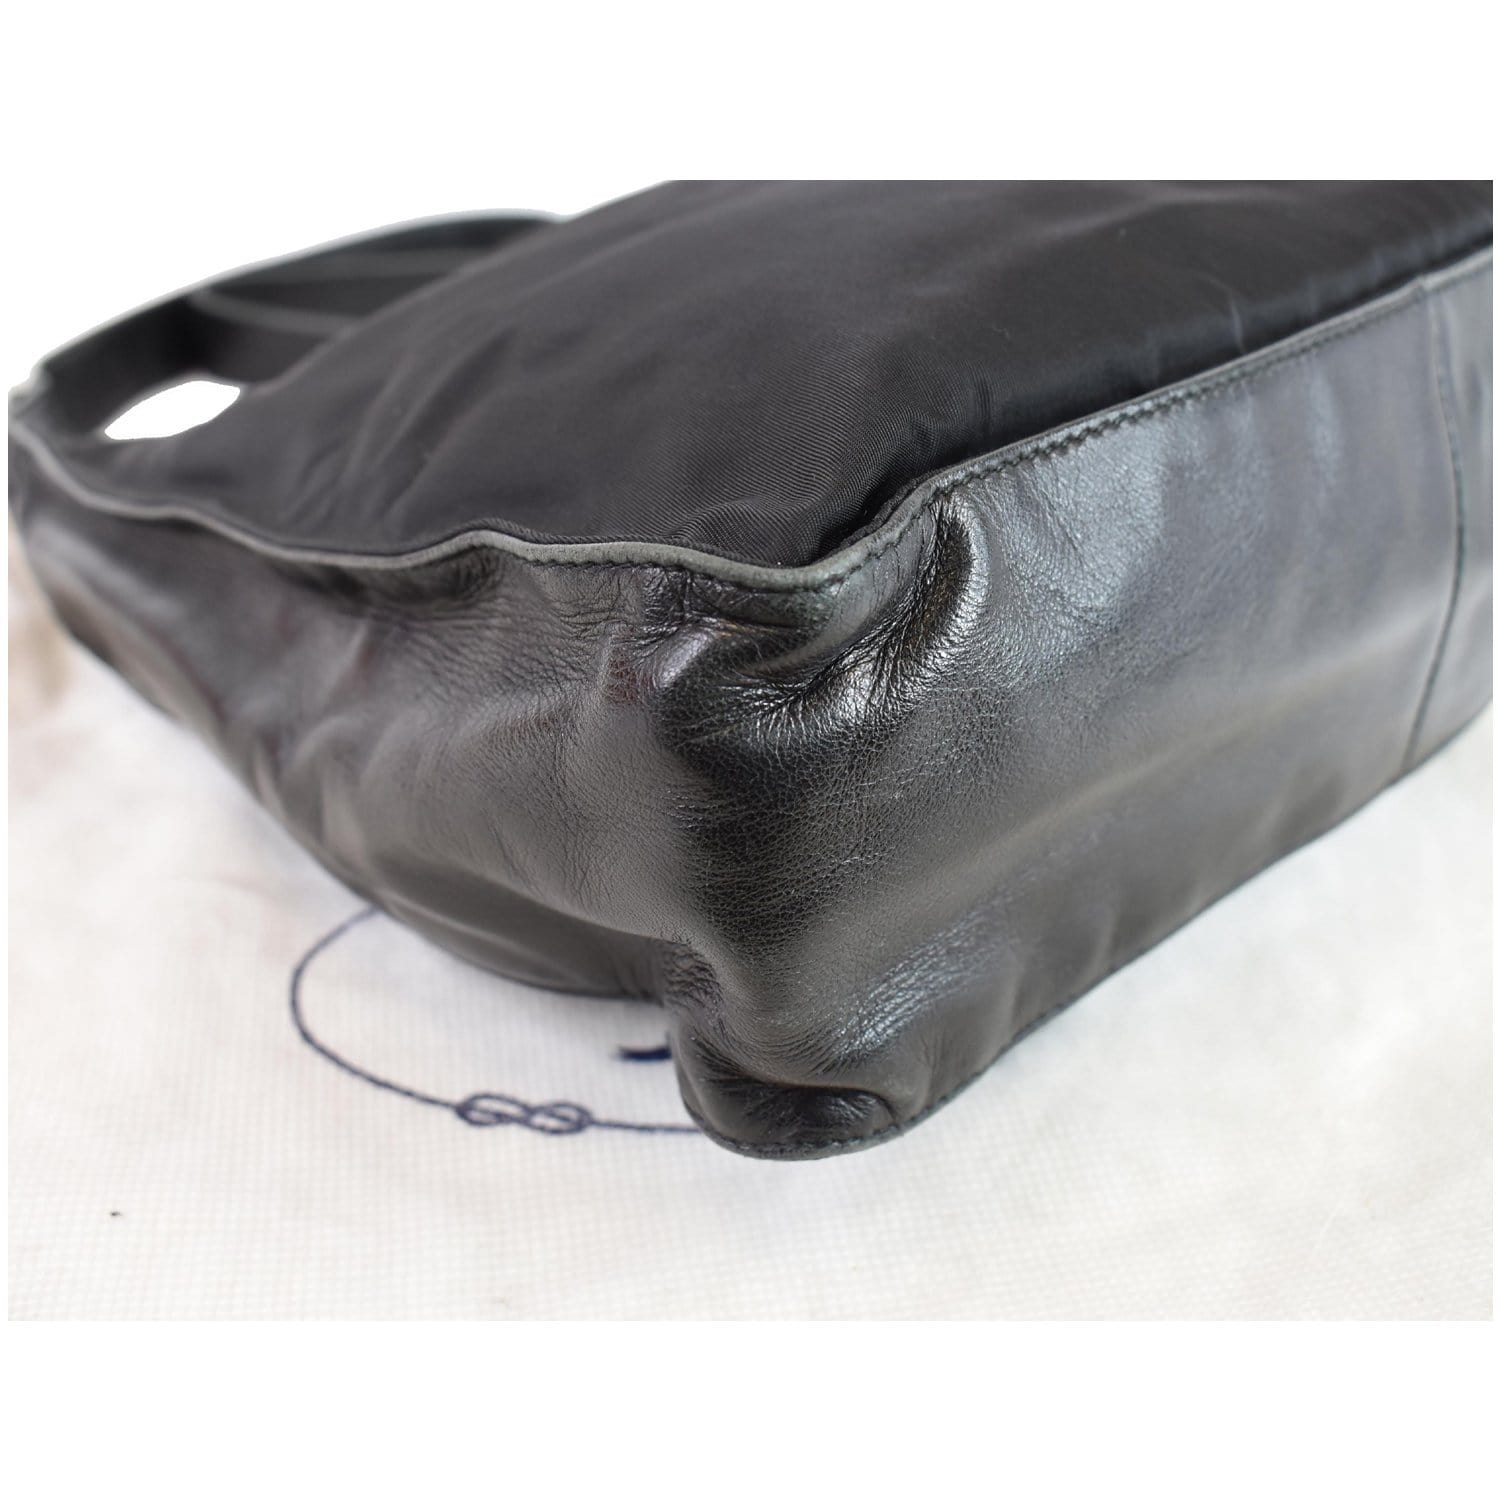 Prada Padded Nylon Shoulder Bag - New in Dust Bag - The Consignment Cafe